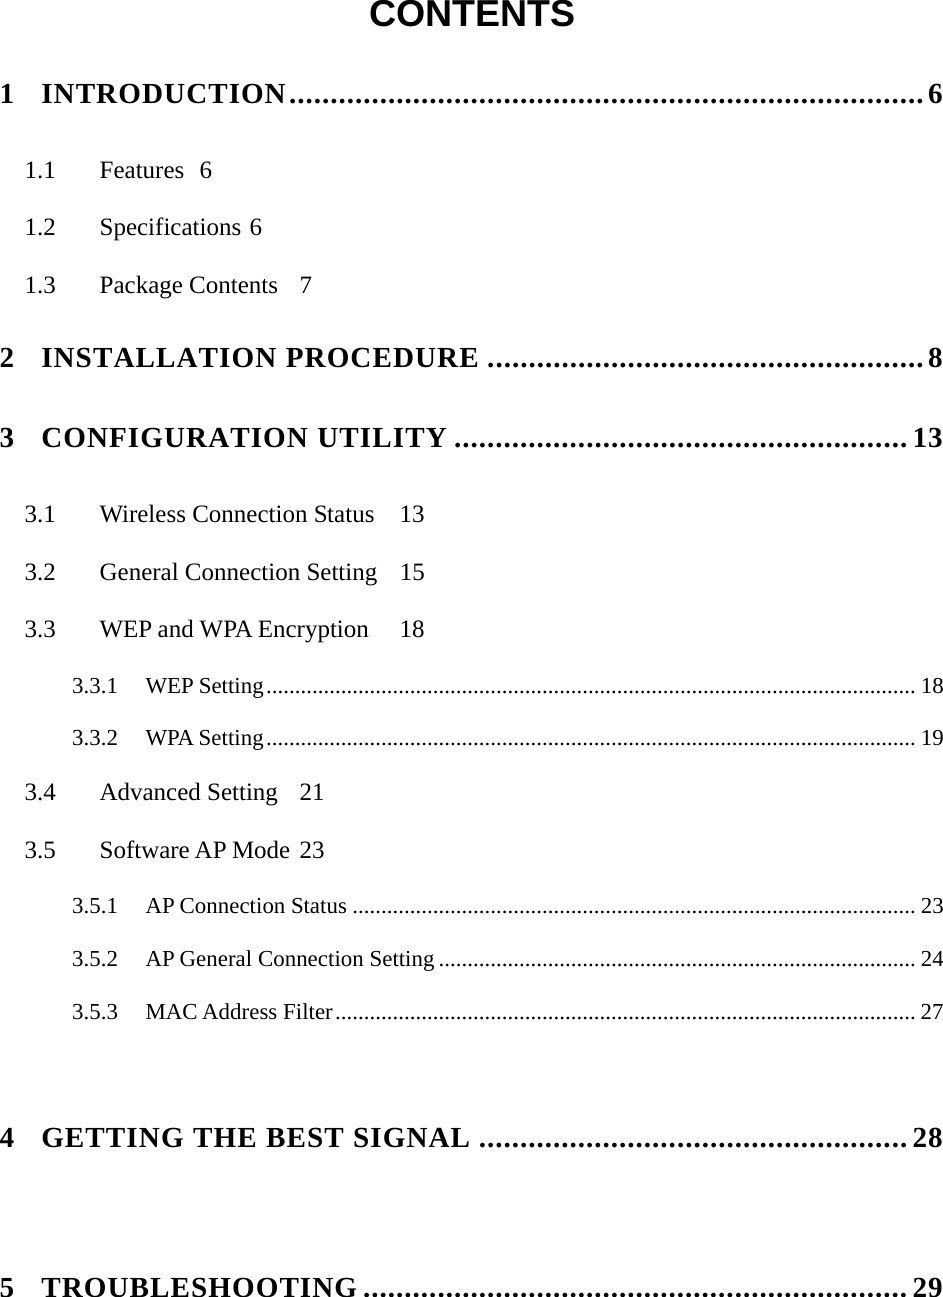   CONTENTS  1 INTRODUCTION.............................................................................6 1.1 Features 6 1.2 Specifications 6 1.3 Package Contents 7 2 INSTALLATION PROCEDURE .....................................................8 3 CONFIGURATION UTILITY .......................................................13 3.1  Wireless Connection Status  13 3.2  General Connection Setting  15 3.3  WEP and WPA Encryption  18 3.3.1 WEP Setting................................................................................................................. 18 3.3.2 WPA Setting................................................................................................................. 19 3.4 Advanced Setting 21 3.5 Software AP Mode 23 3.5.1 AP Connection Status .................................................................................................. 23 3.5.2 AP General Connection Setting ................................................................................... 24 3.5.3 MAC Address Filter..................................................................................................... 27   4 GETTING THE BEST SIGNAL .................................................... 28   5 TROUBLESHOOTING ..................................................................29    